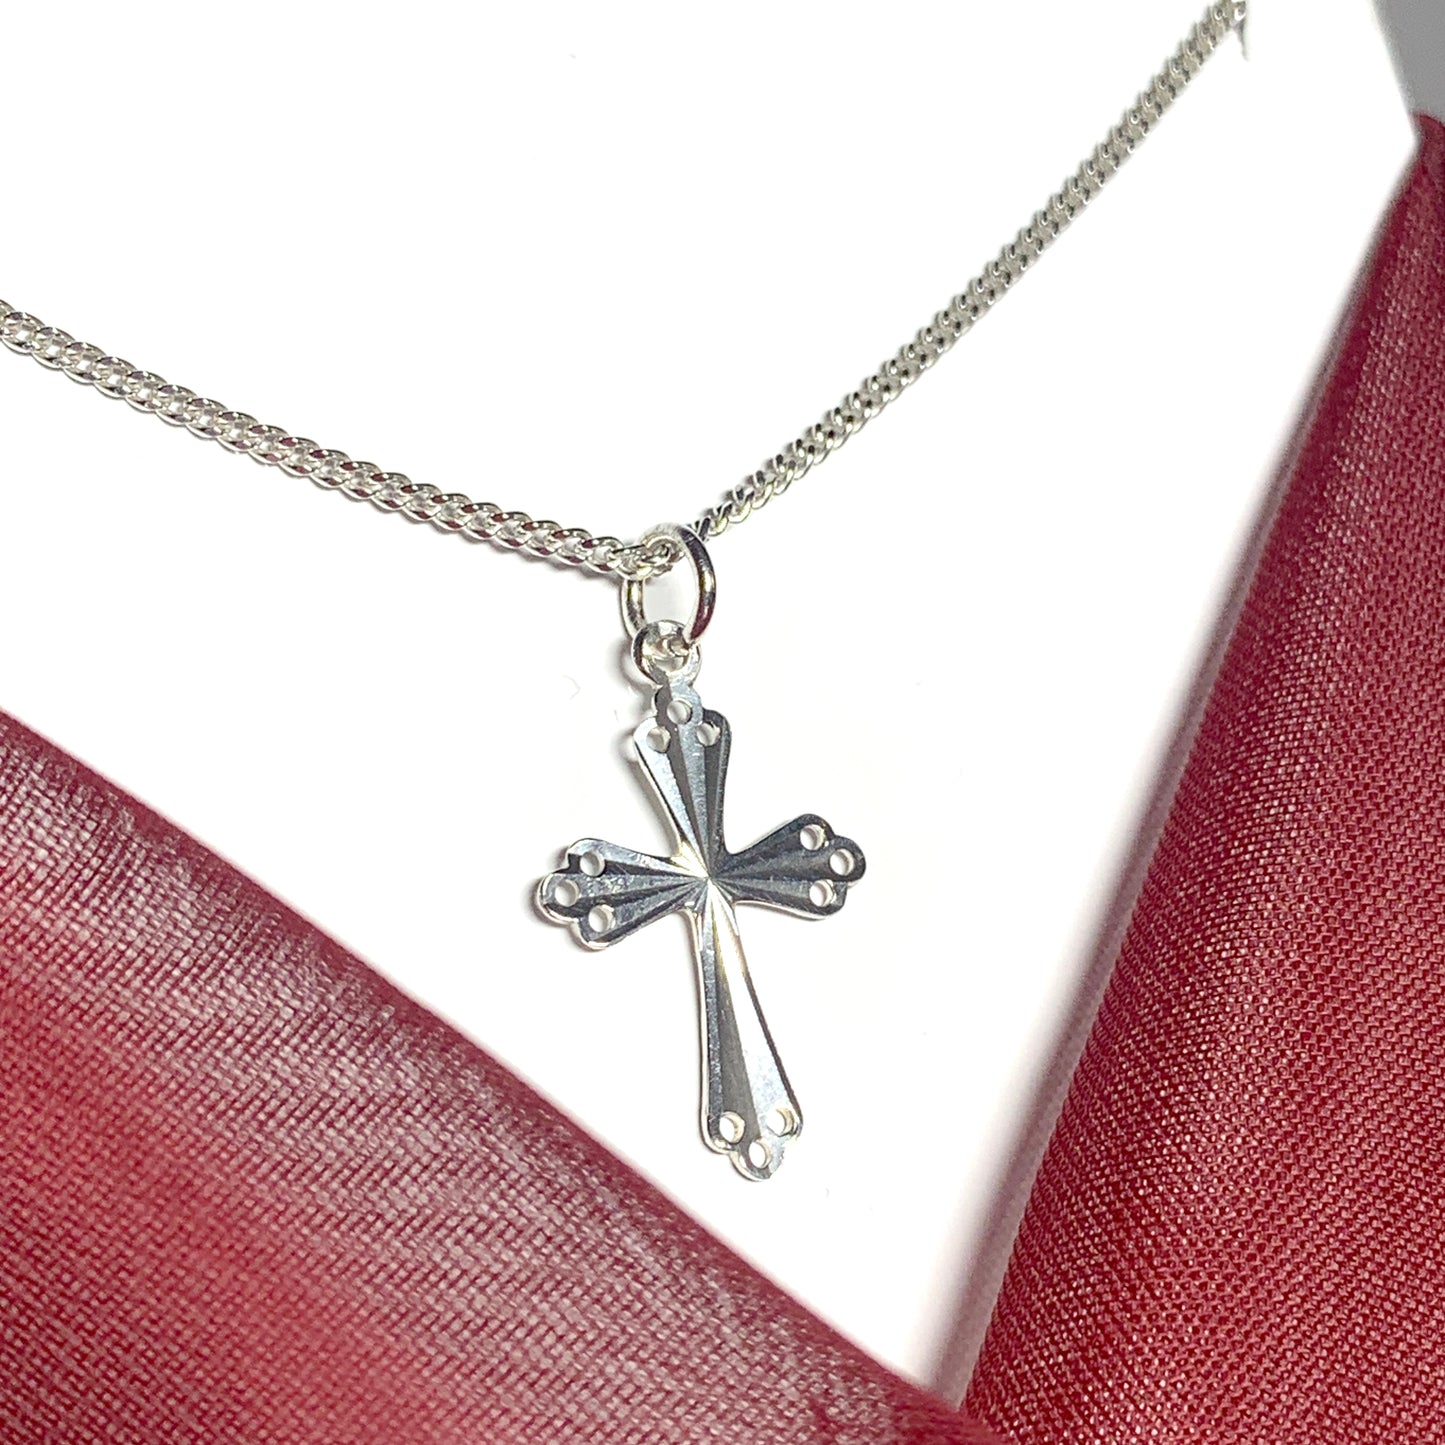 Small solid cross open pierced patterned sterling silver diamond cut with chain